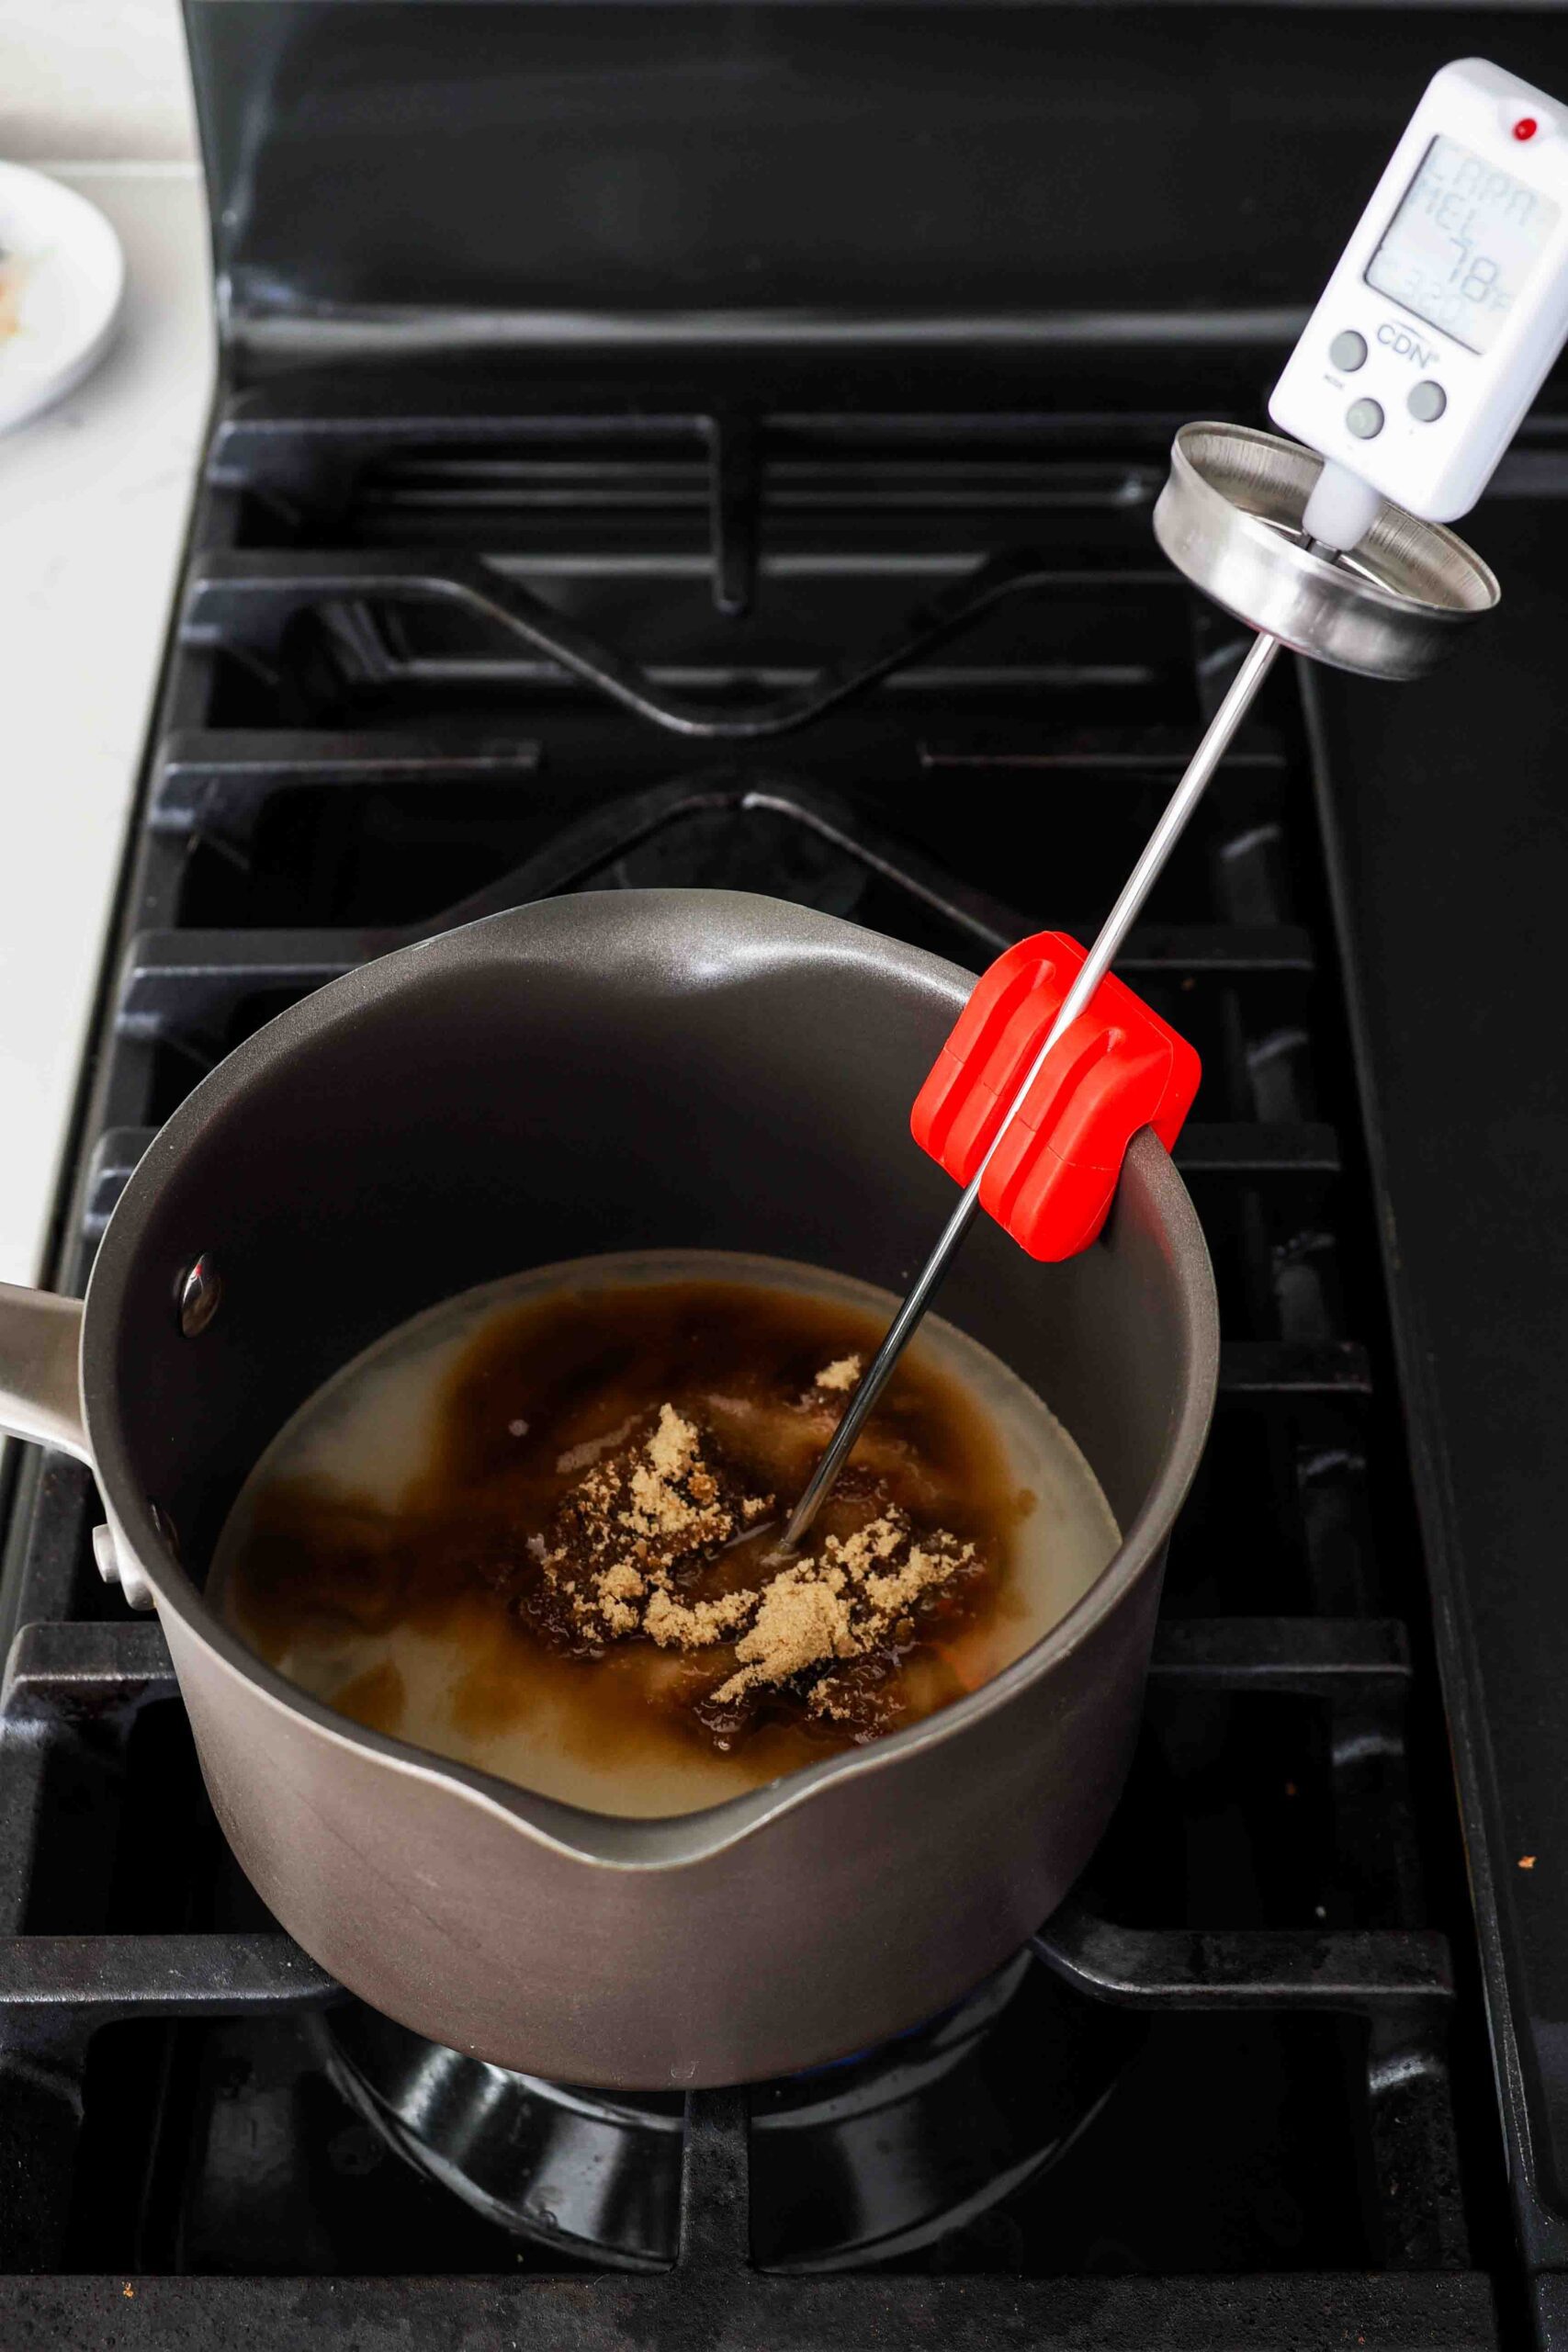 Unmixed sugar, brown sugar, and corn syrup in a pot over the stove with a candy thermometer.